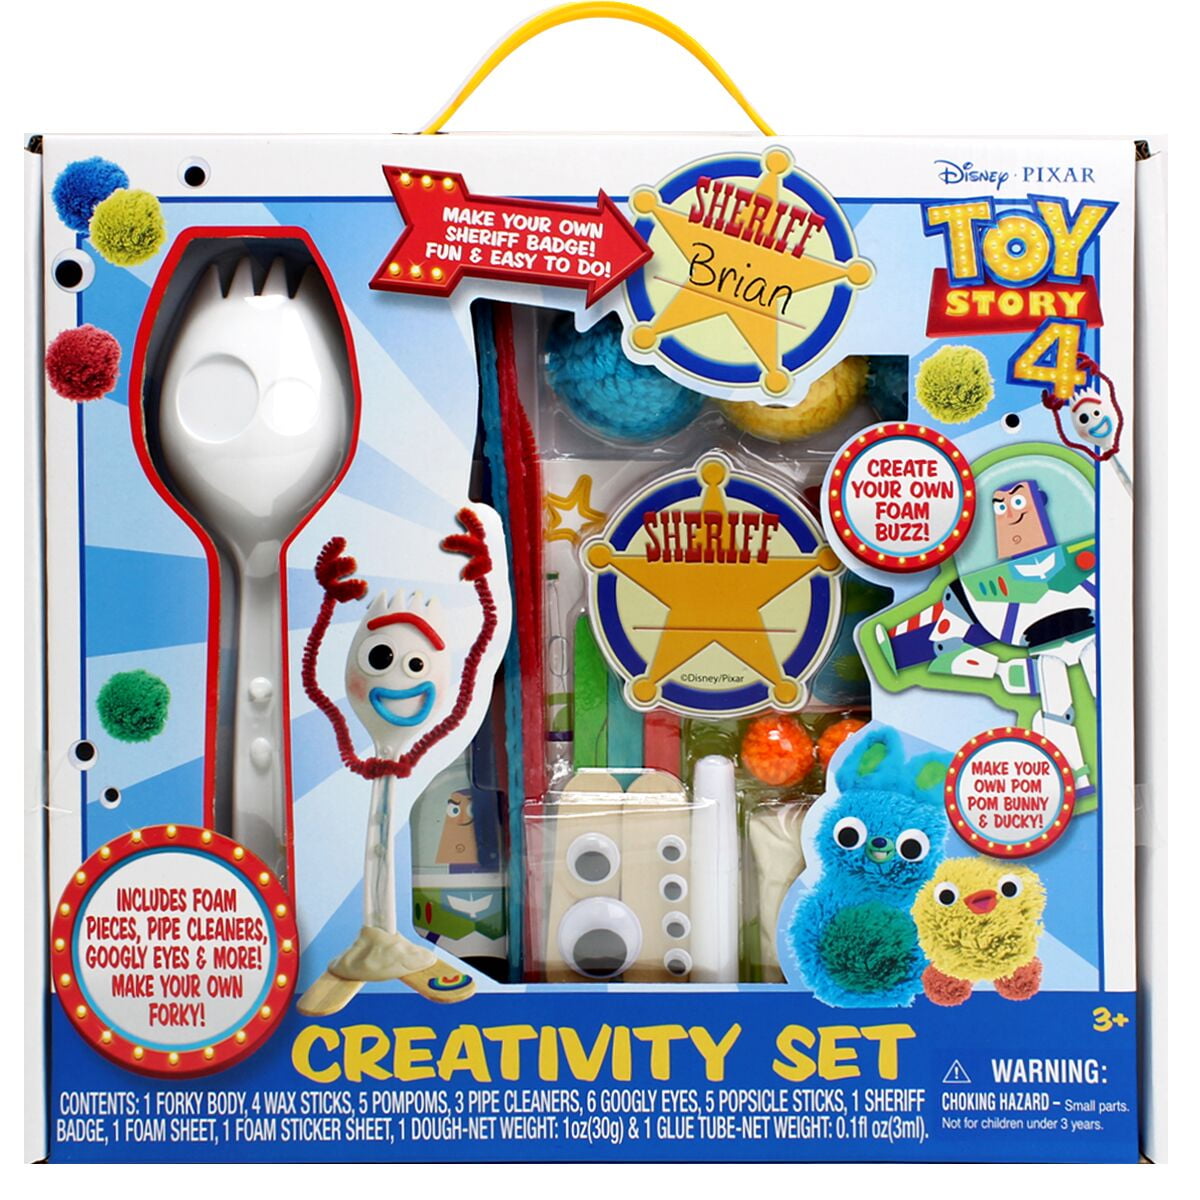 Toy Story 4 Craft Creativity Set Make Your Own Forky And Other